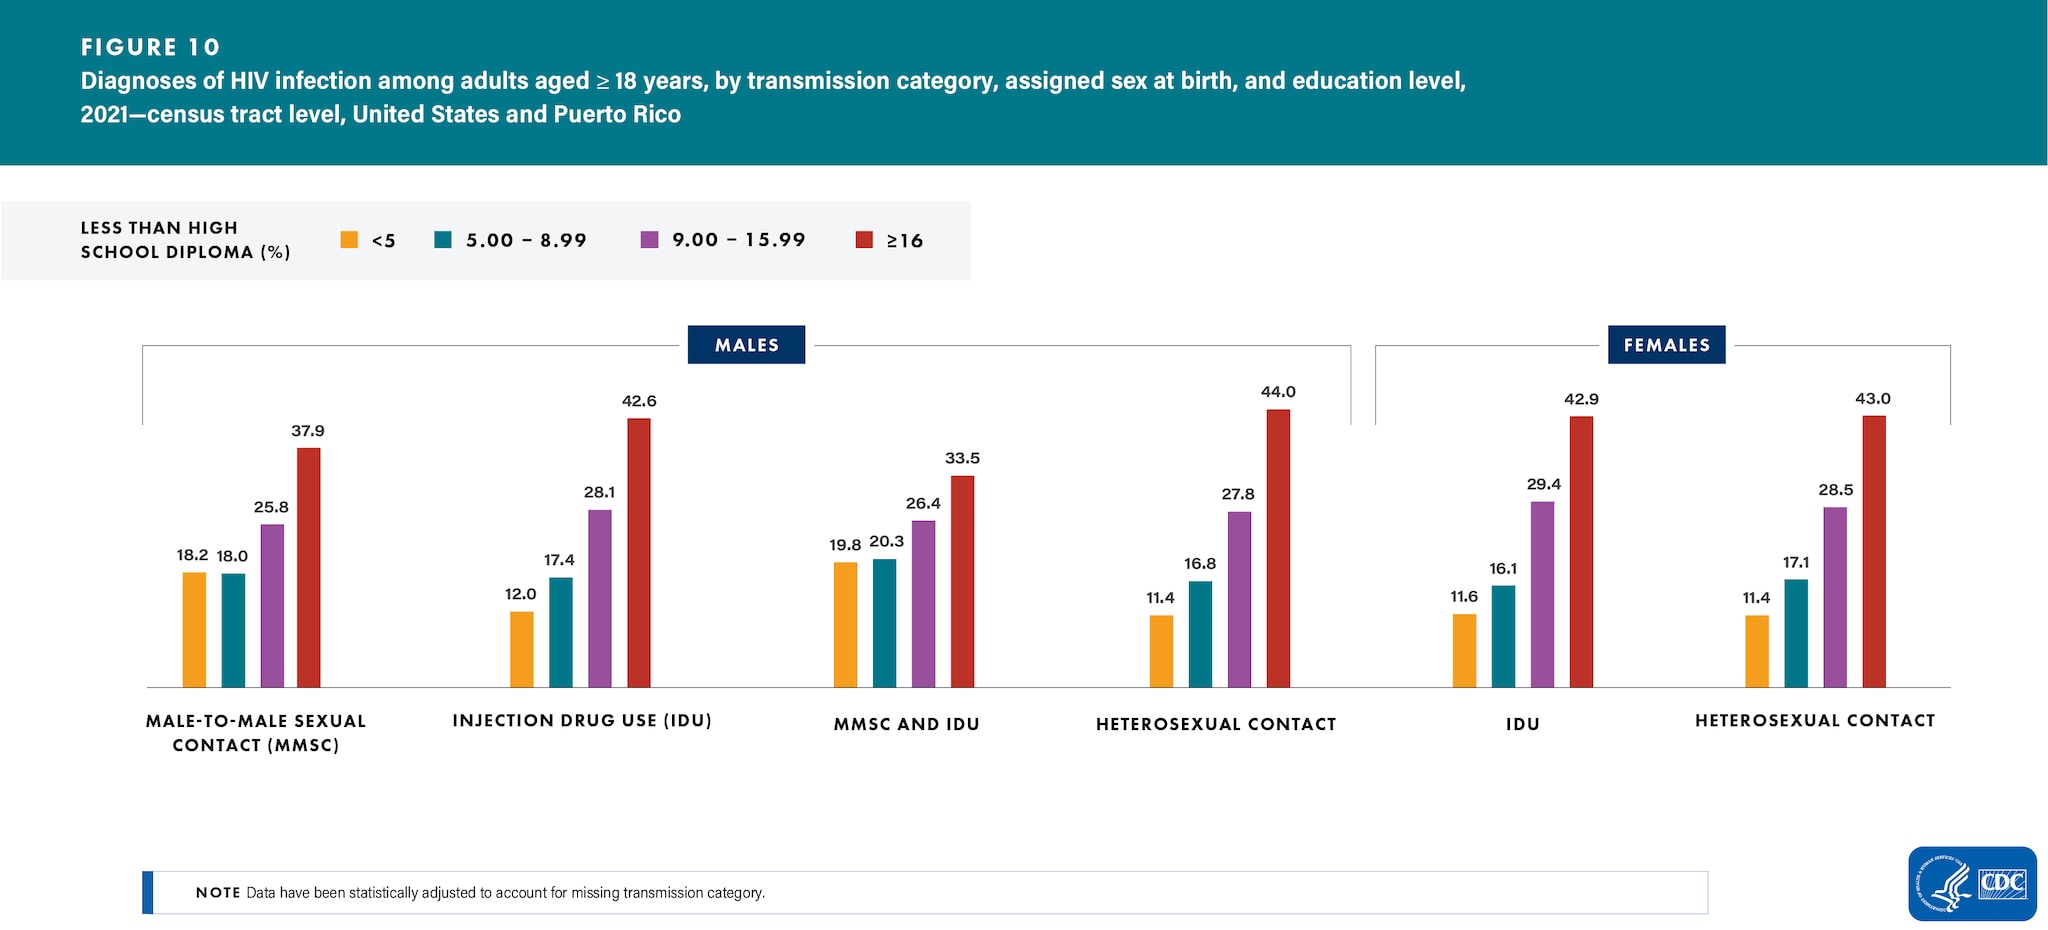 In 2021, adults who lived in census tracts with the lowest level of education (where 16% or more of the residents had less than a high school diploma) accounted for the highest percentages of HIV diagnoses among all transmission categories for both sexes.